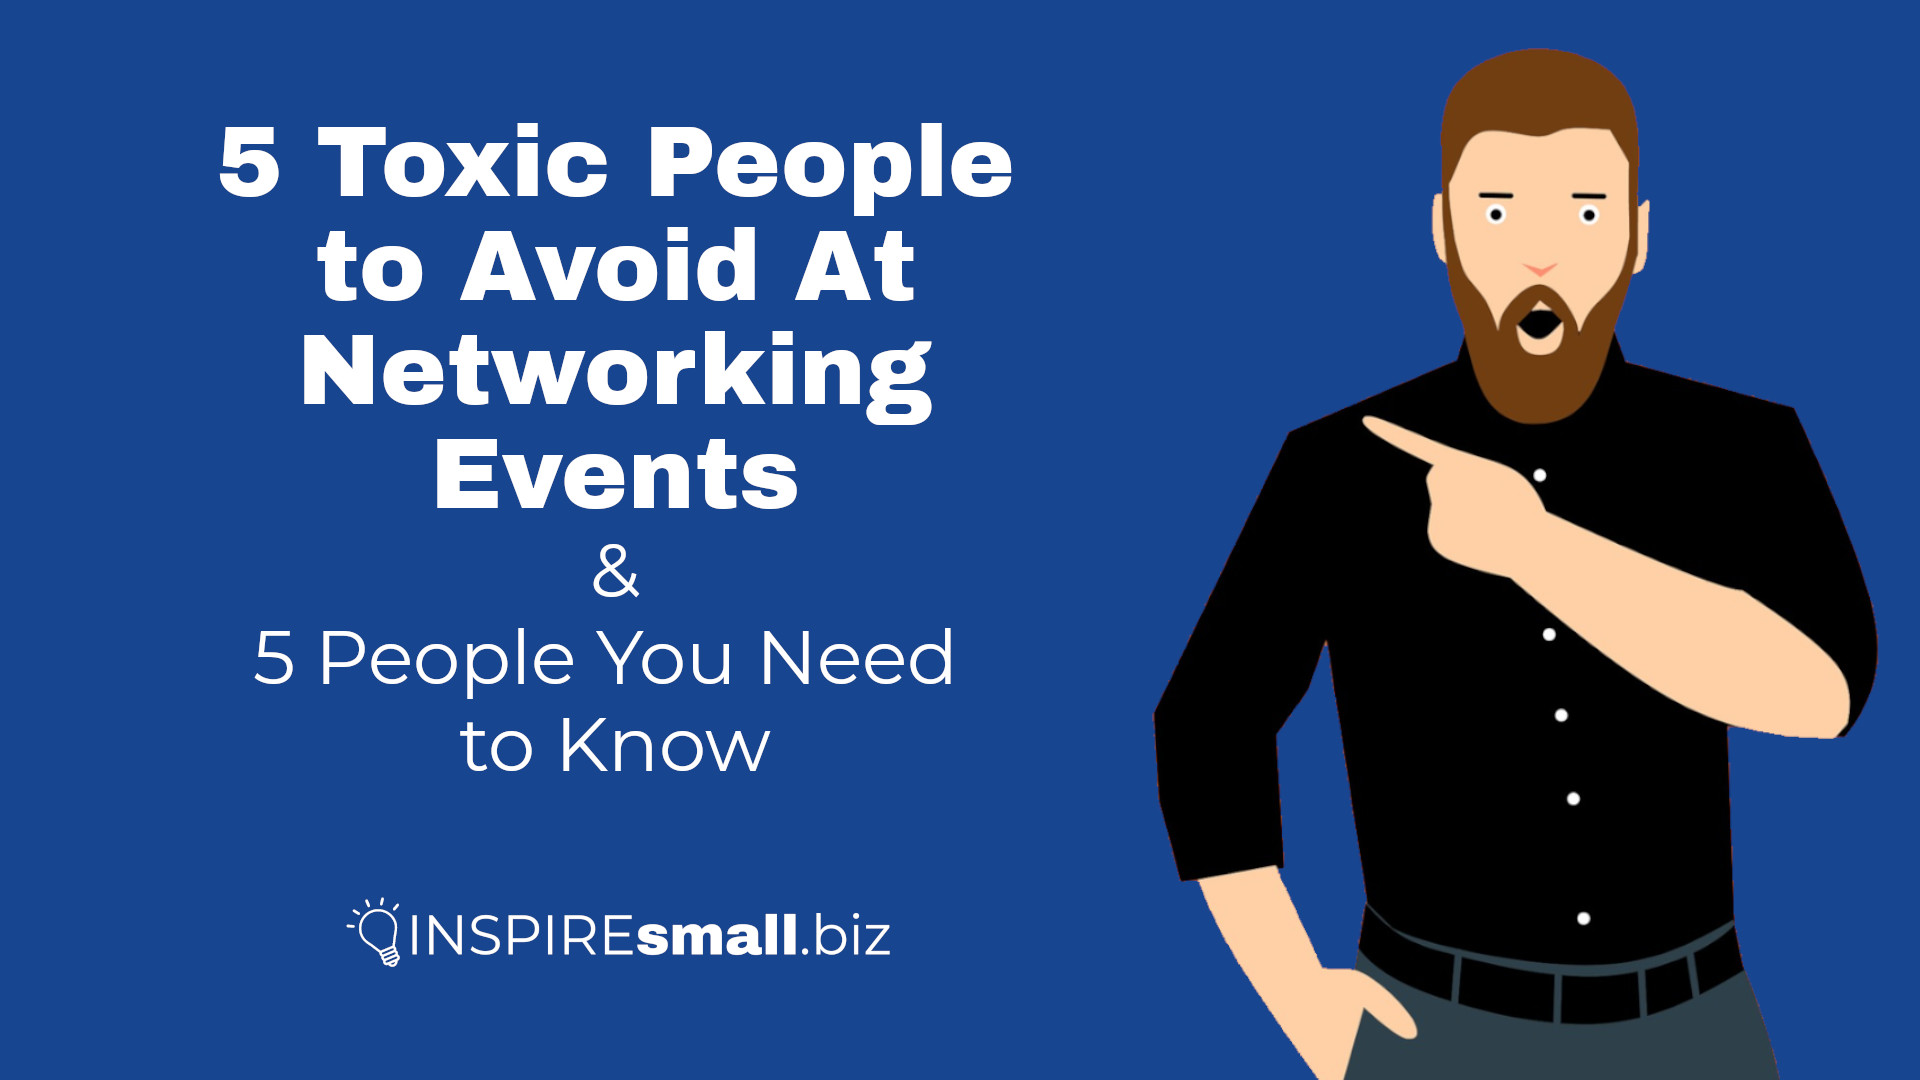 5 Toxic People to Avoid at Networking Events